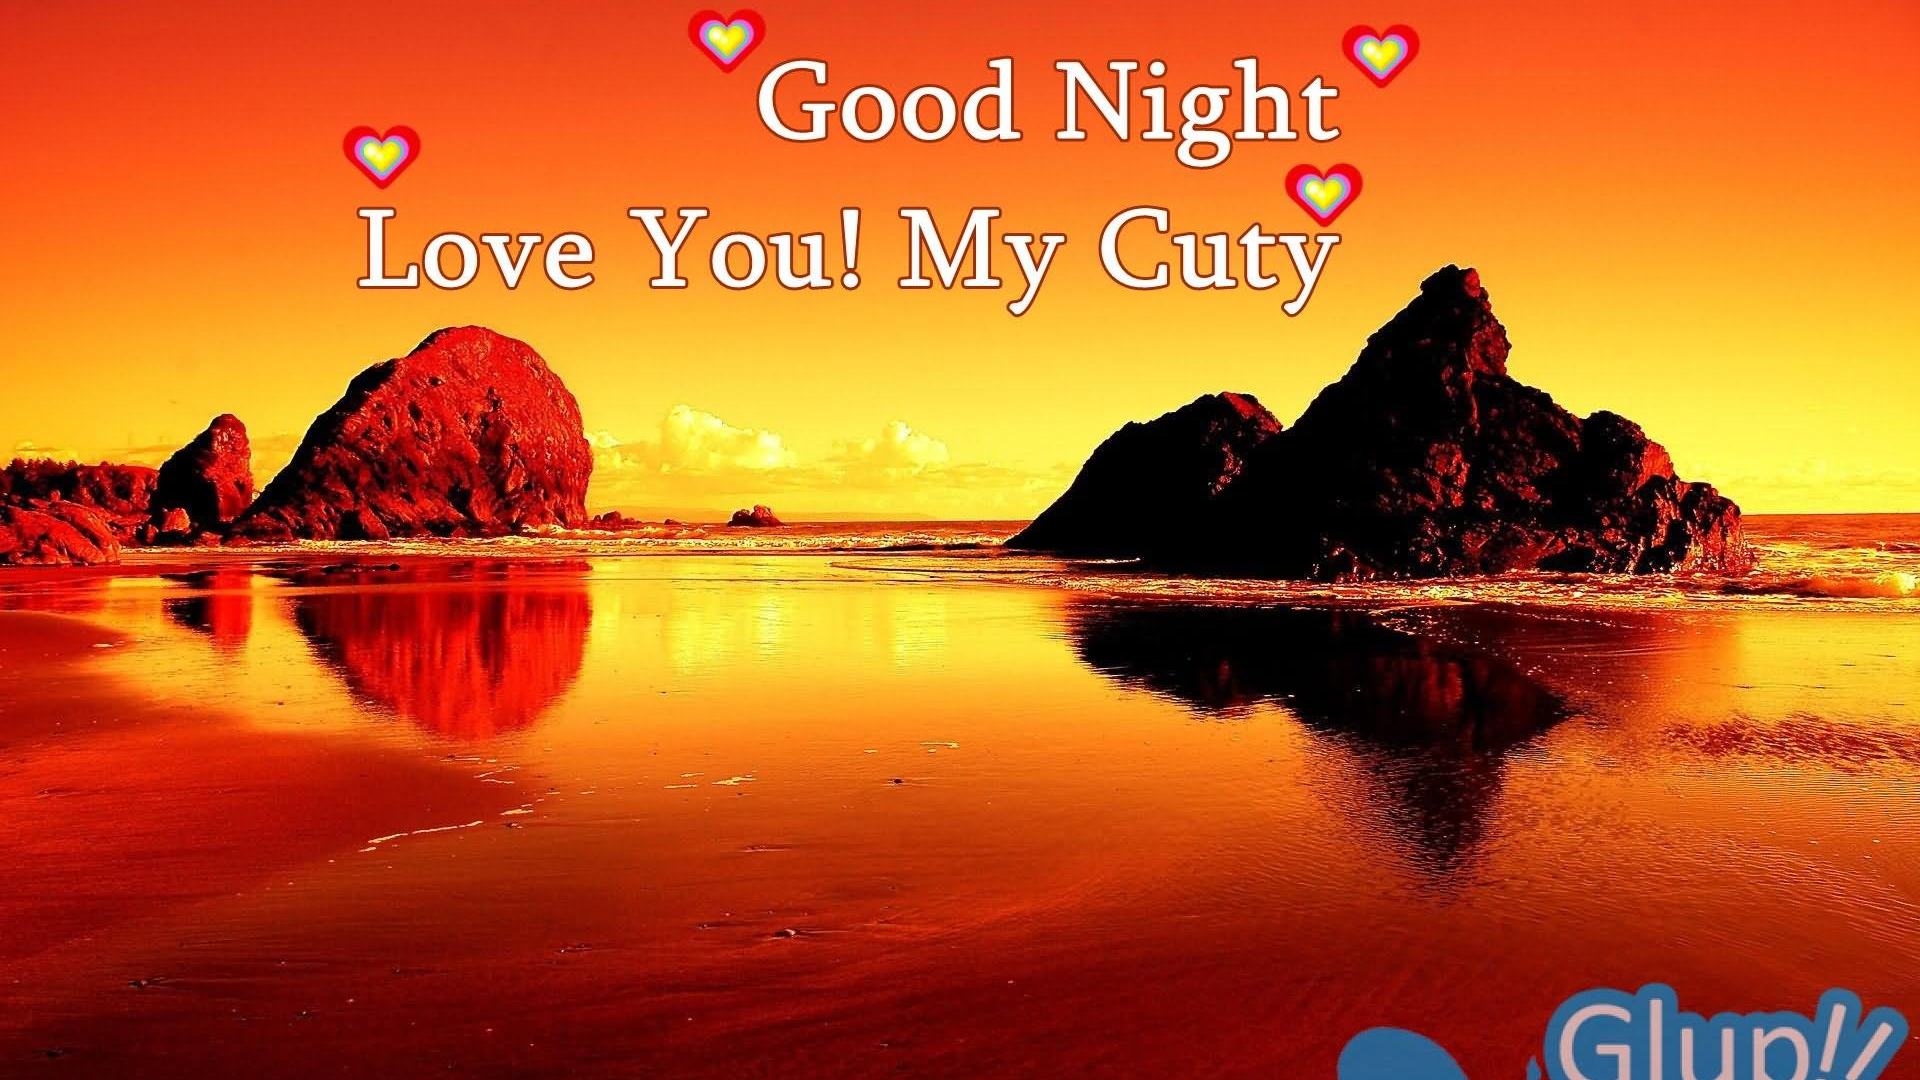 Free download 15 Awesome Good Night Love Image [1920x1200] for your Desktop, Mobile & Tablet. Explore Good Night I Love You Wallpaper. Good Night I Love You Wallpaper, I